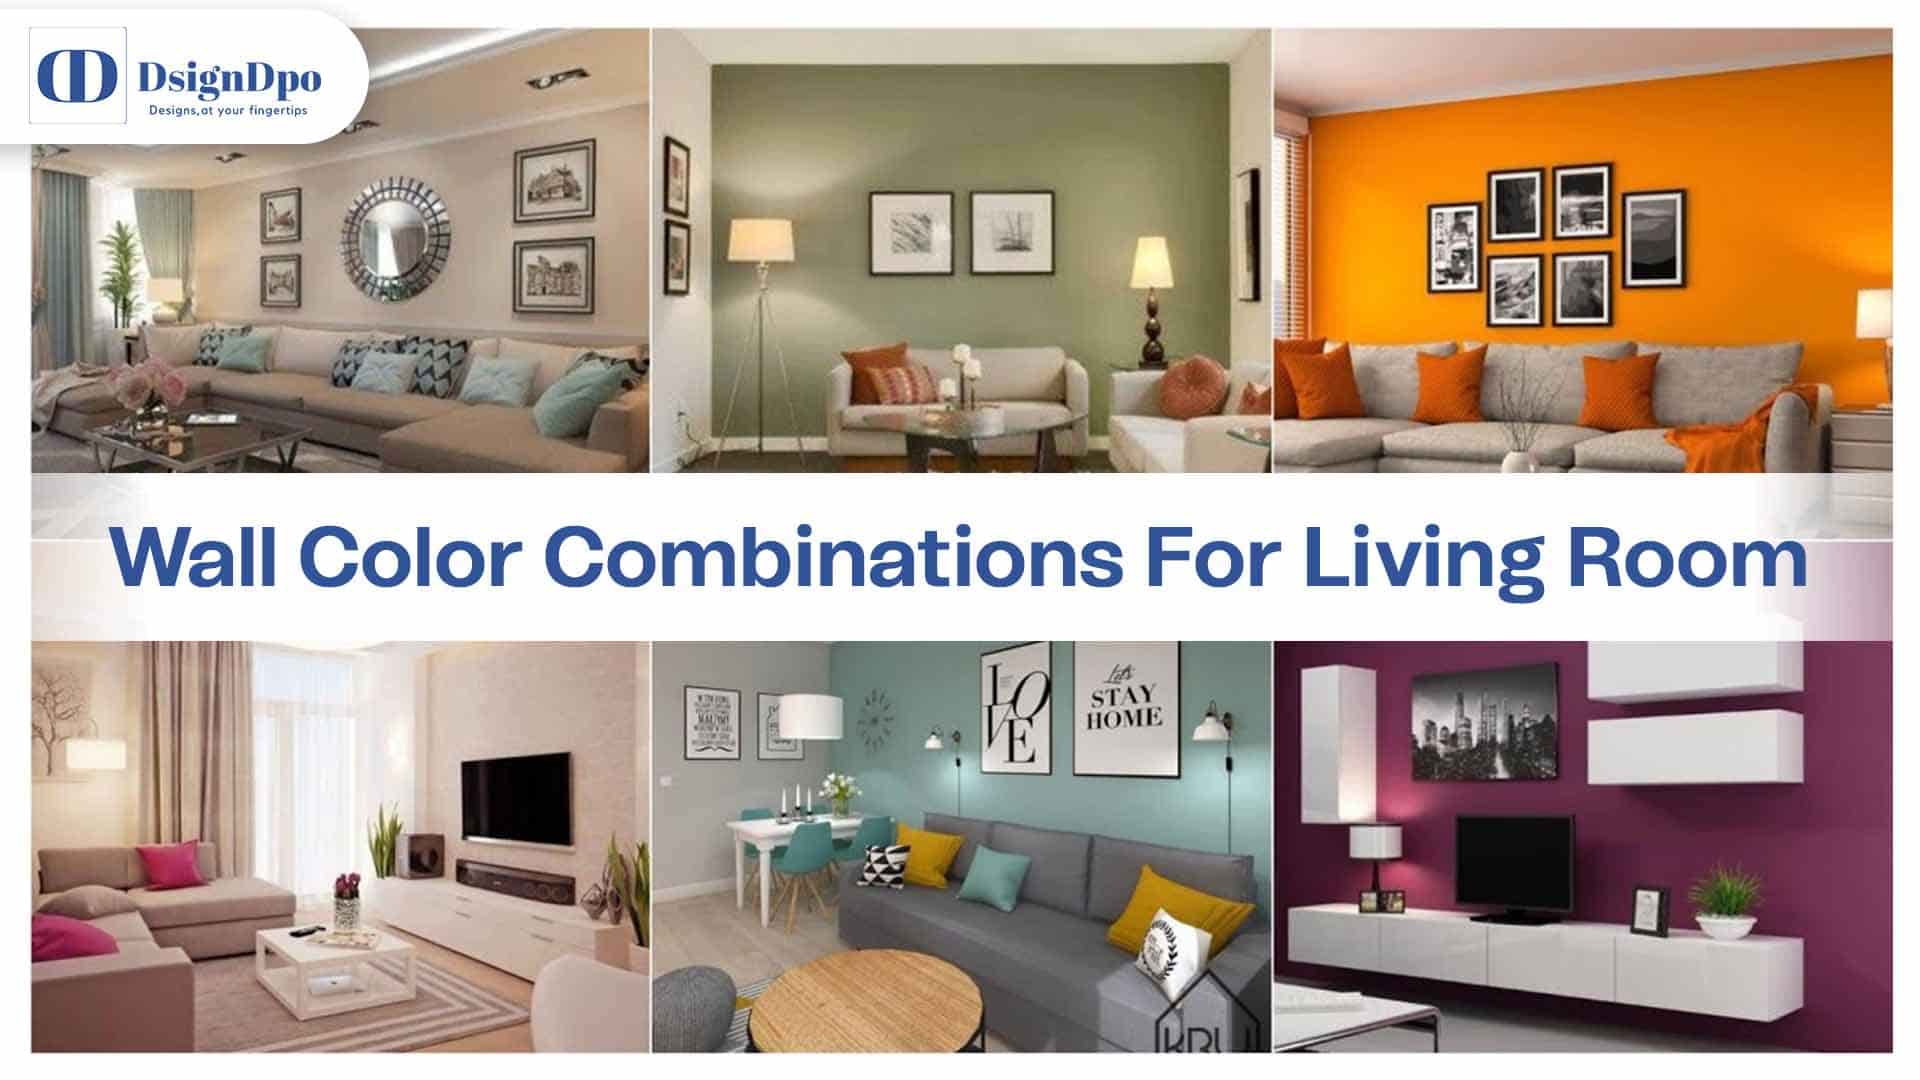 Wall Color Combinations for Living Room